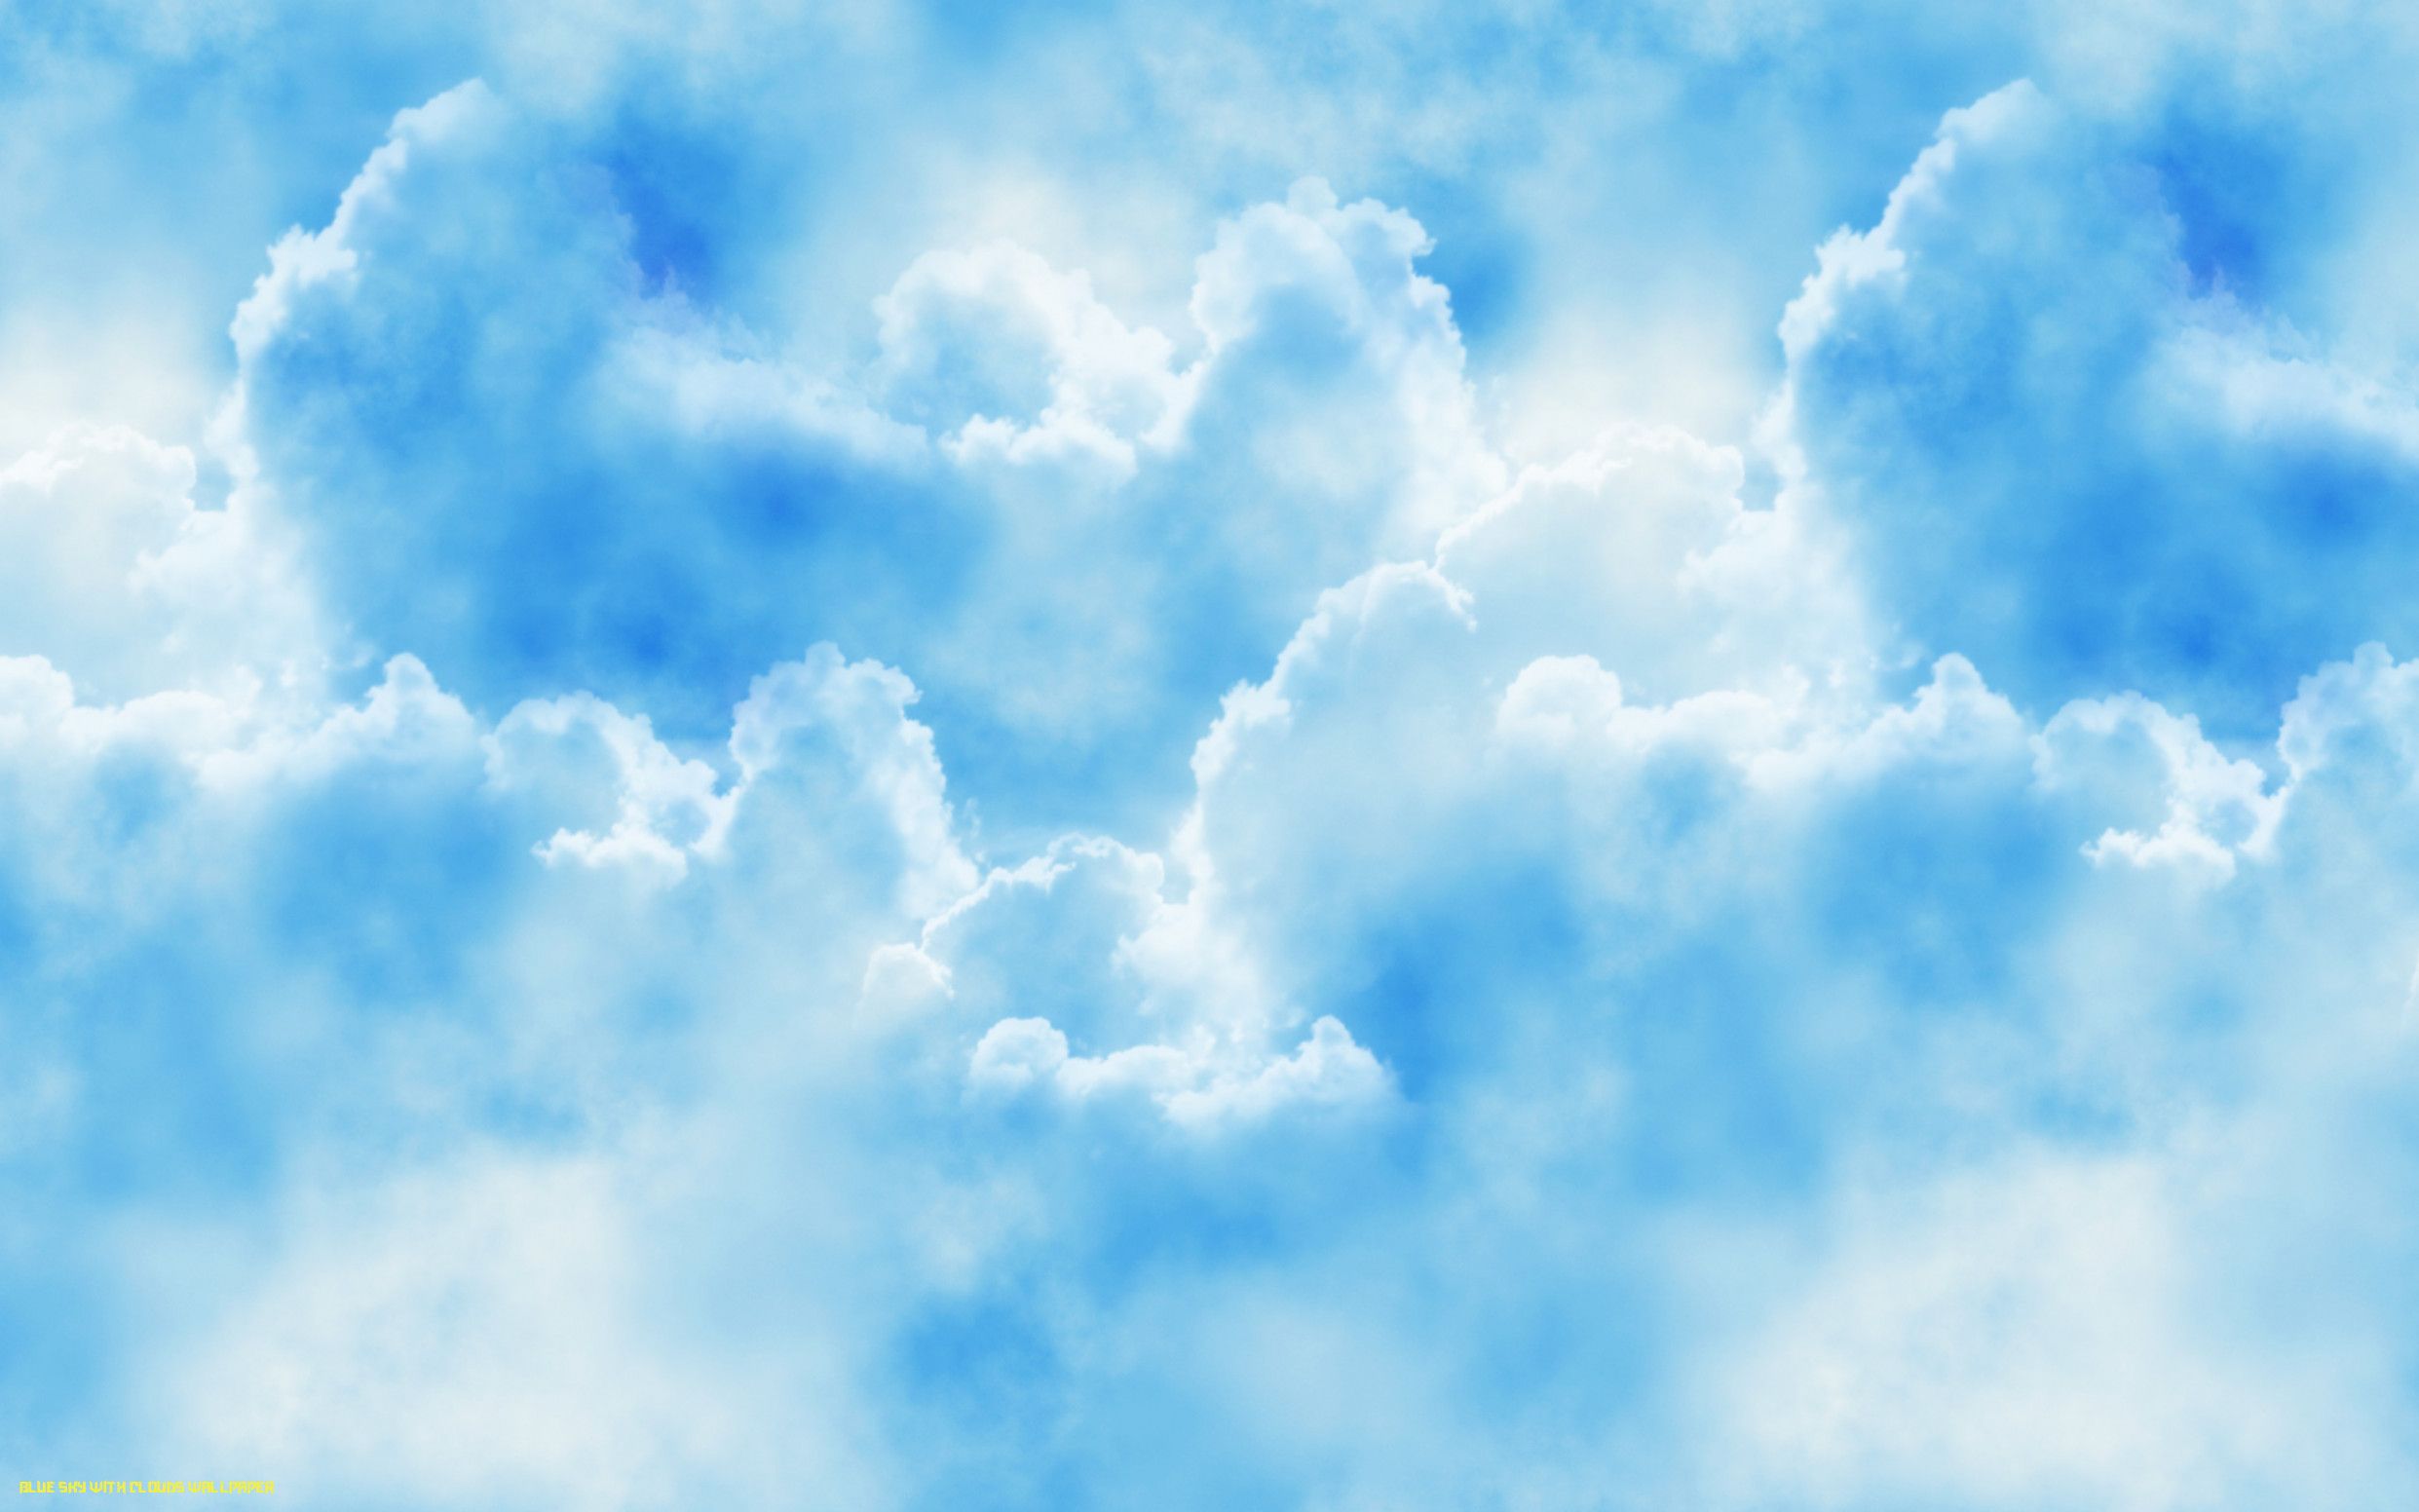 Blue Sky With Clouds Wallpaper sky with clouds wallpaper